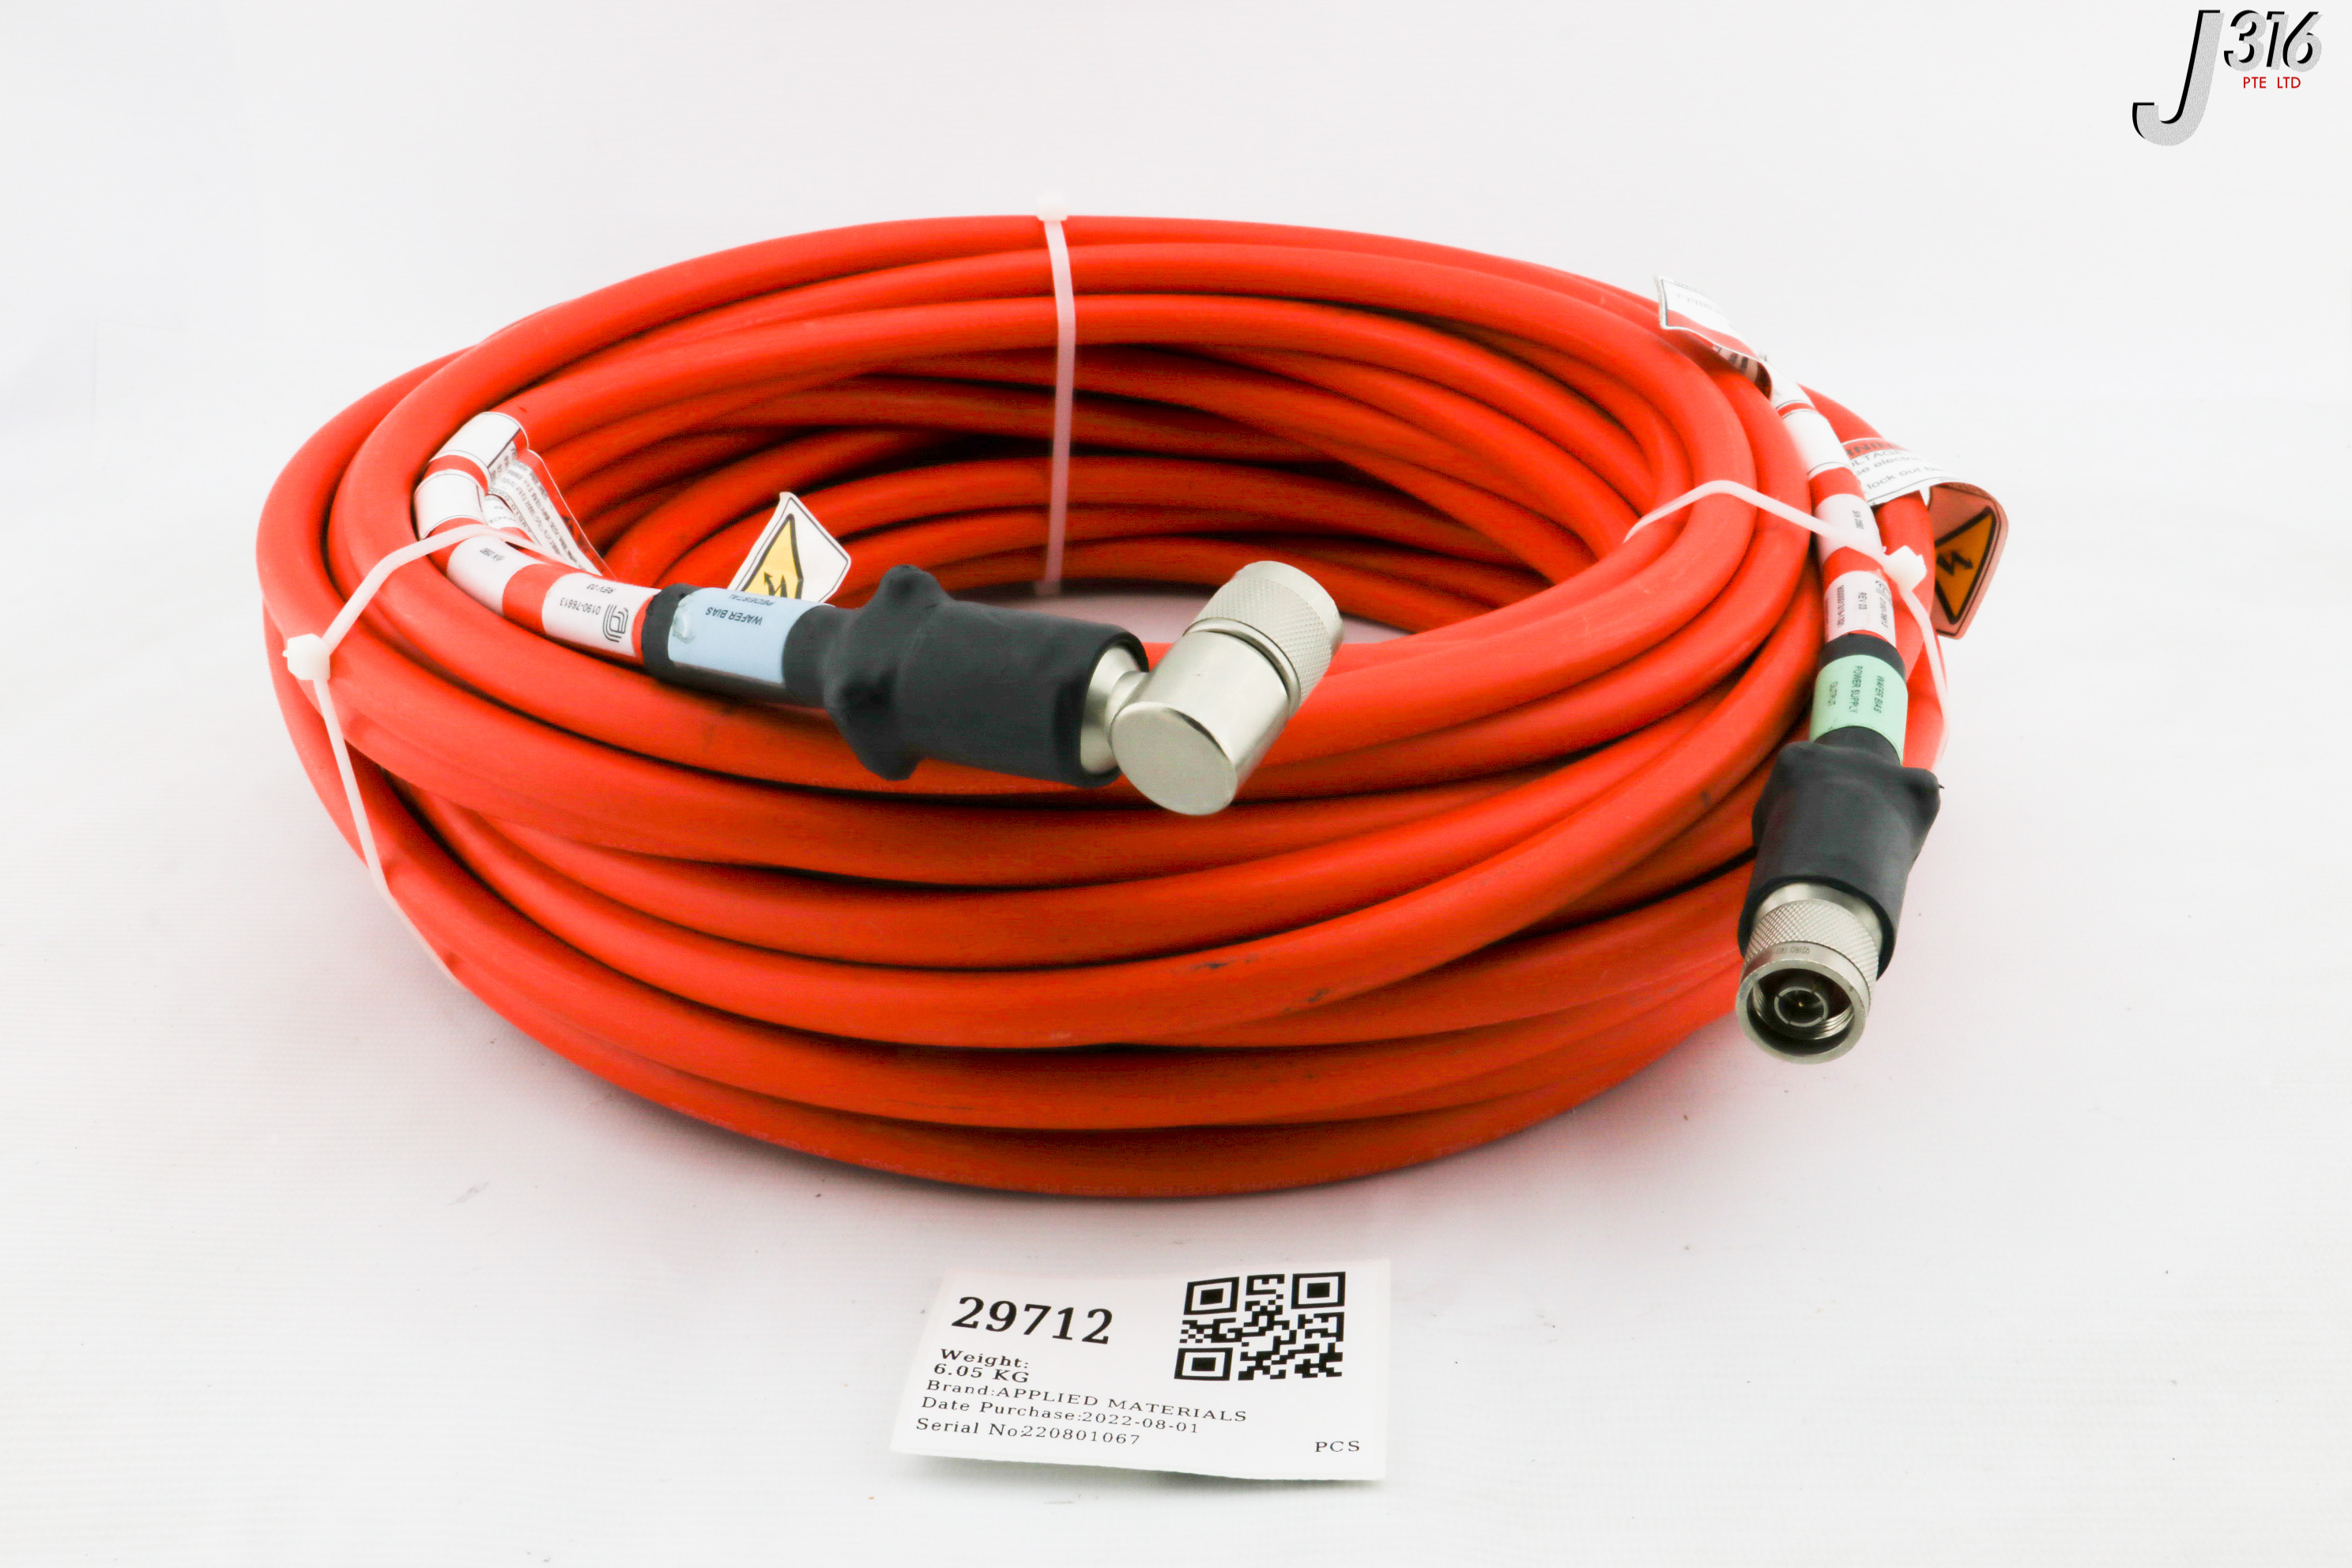 29712 APPLIED MATERIALS RF CABLE ASSY, LENGTH: 22M, 45% OFF